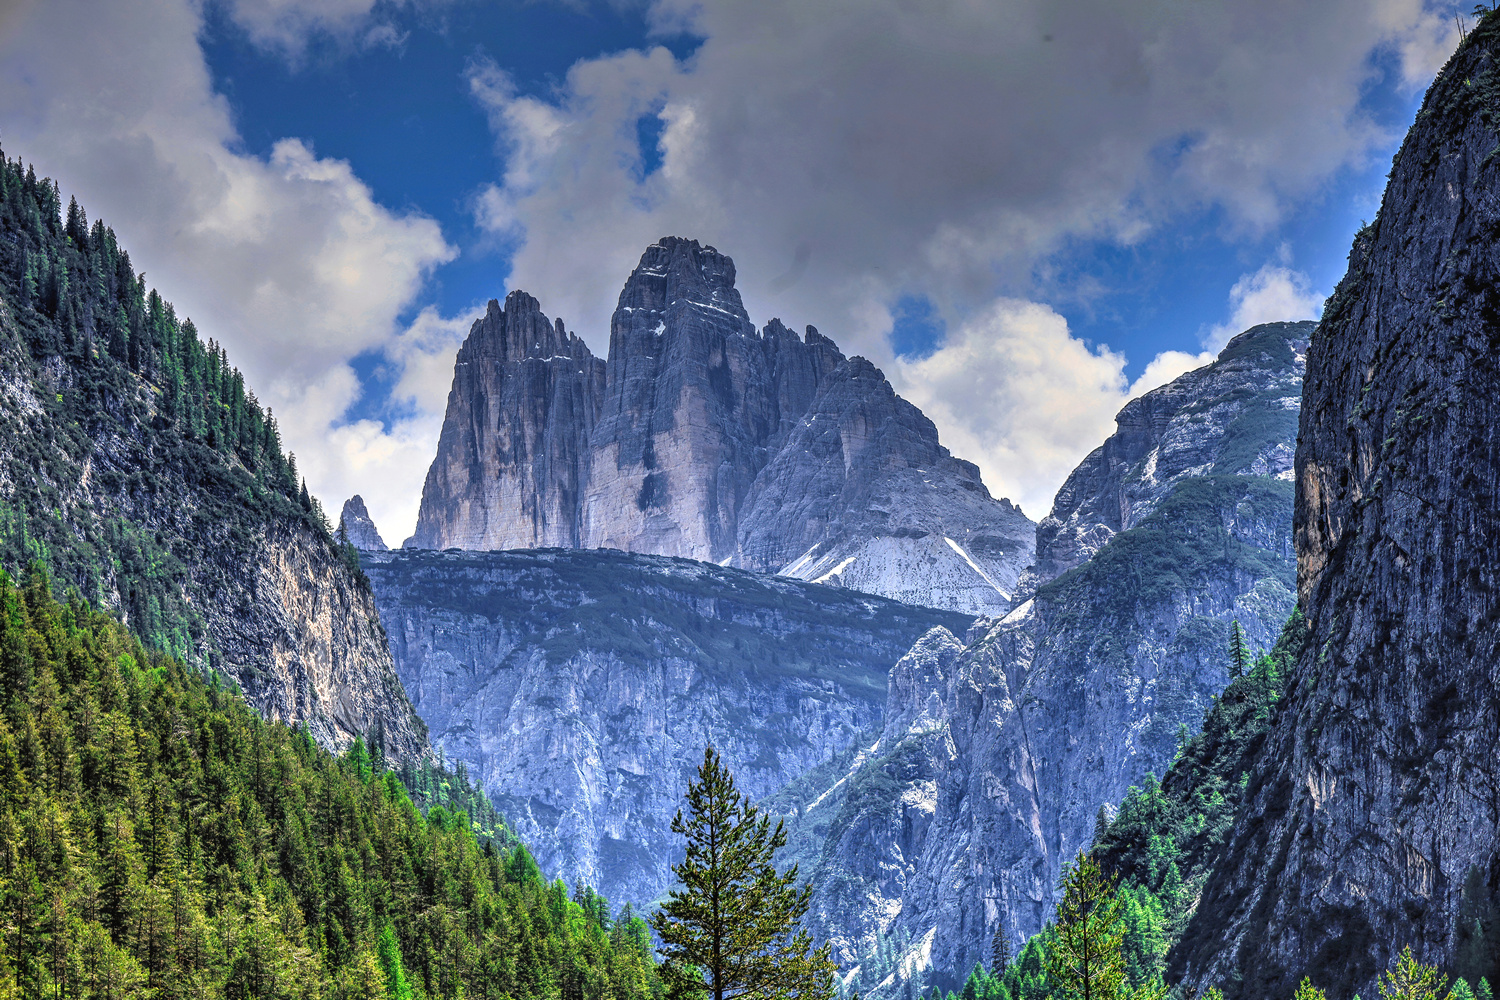 A Closer View of the Three Peaks of Lavaredo